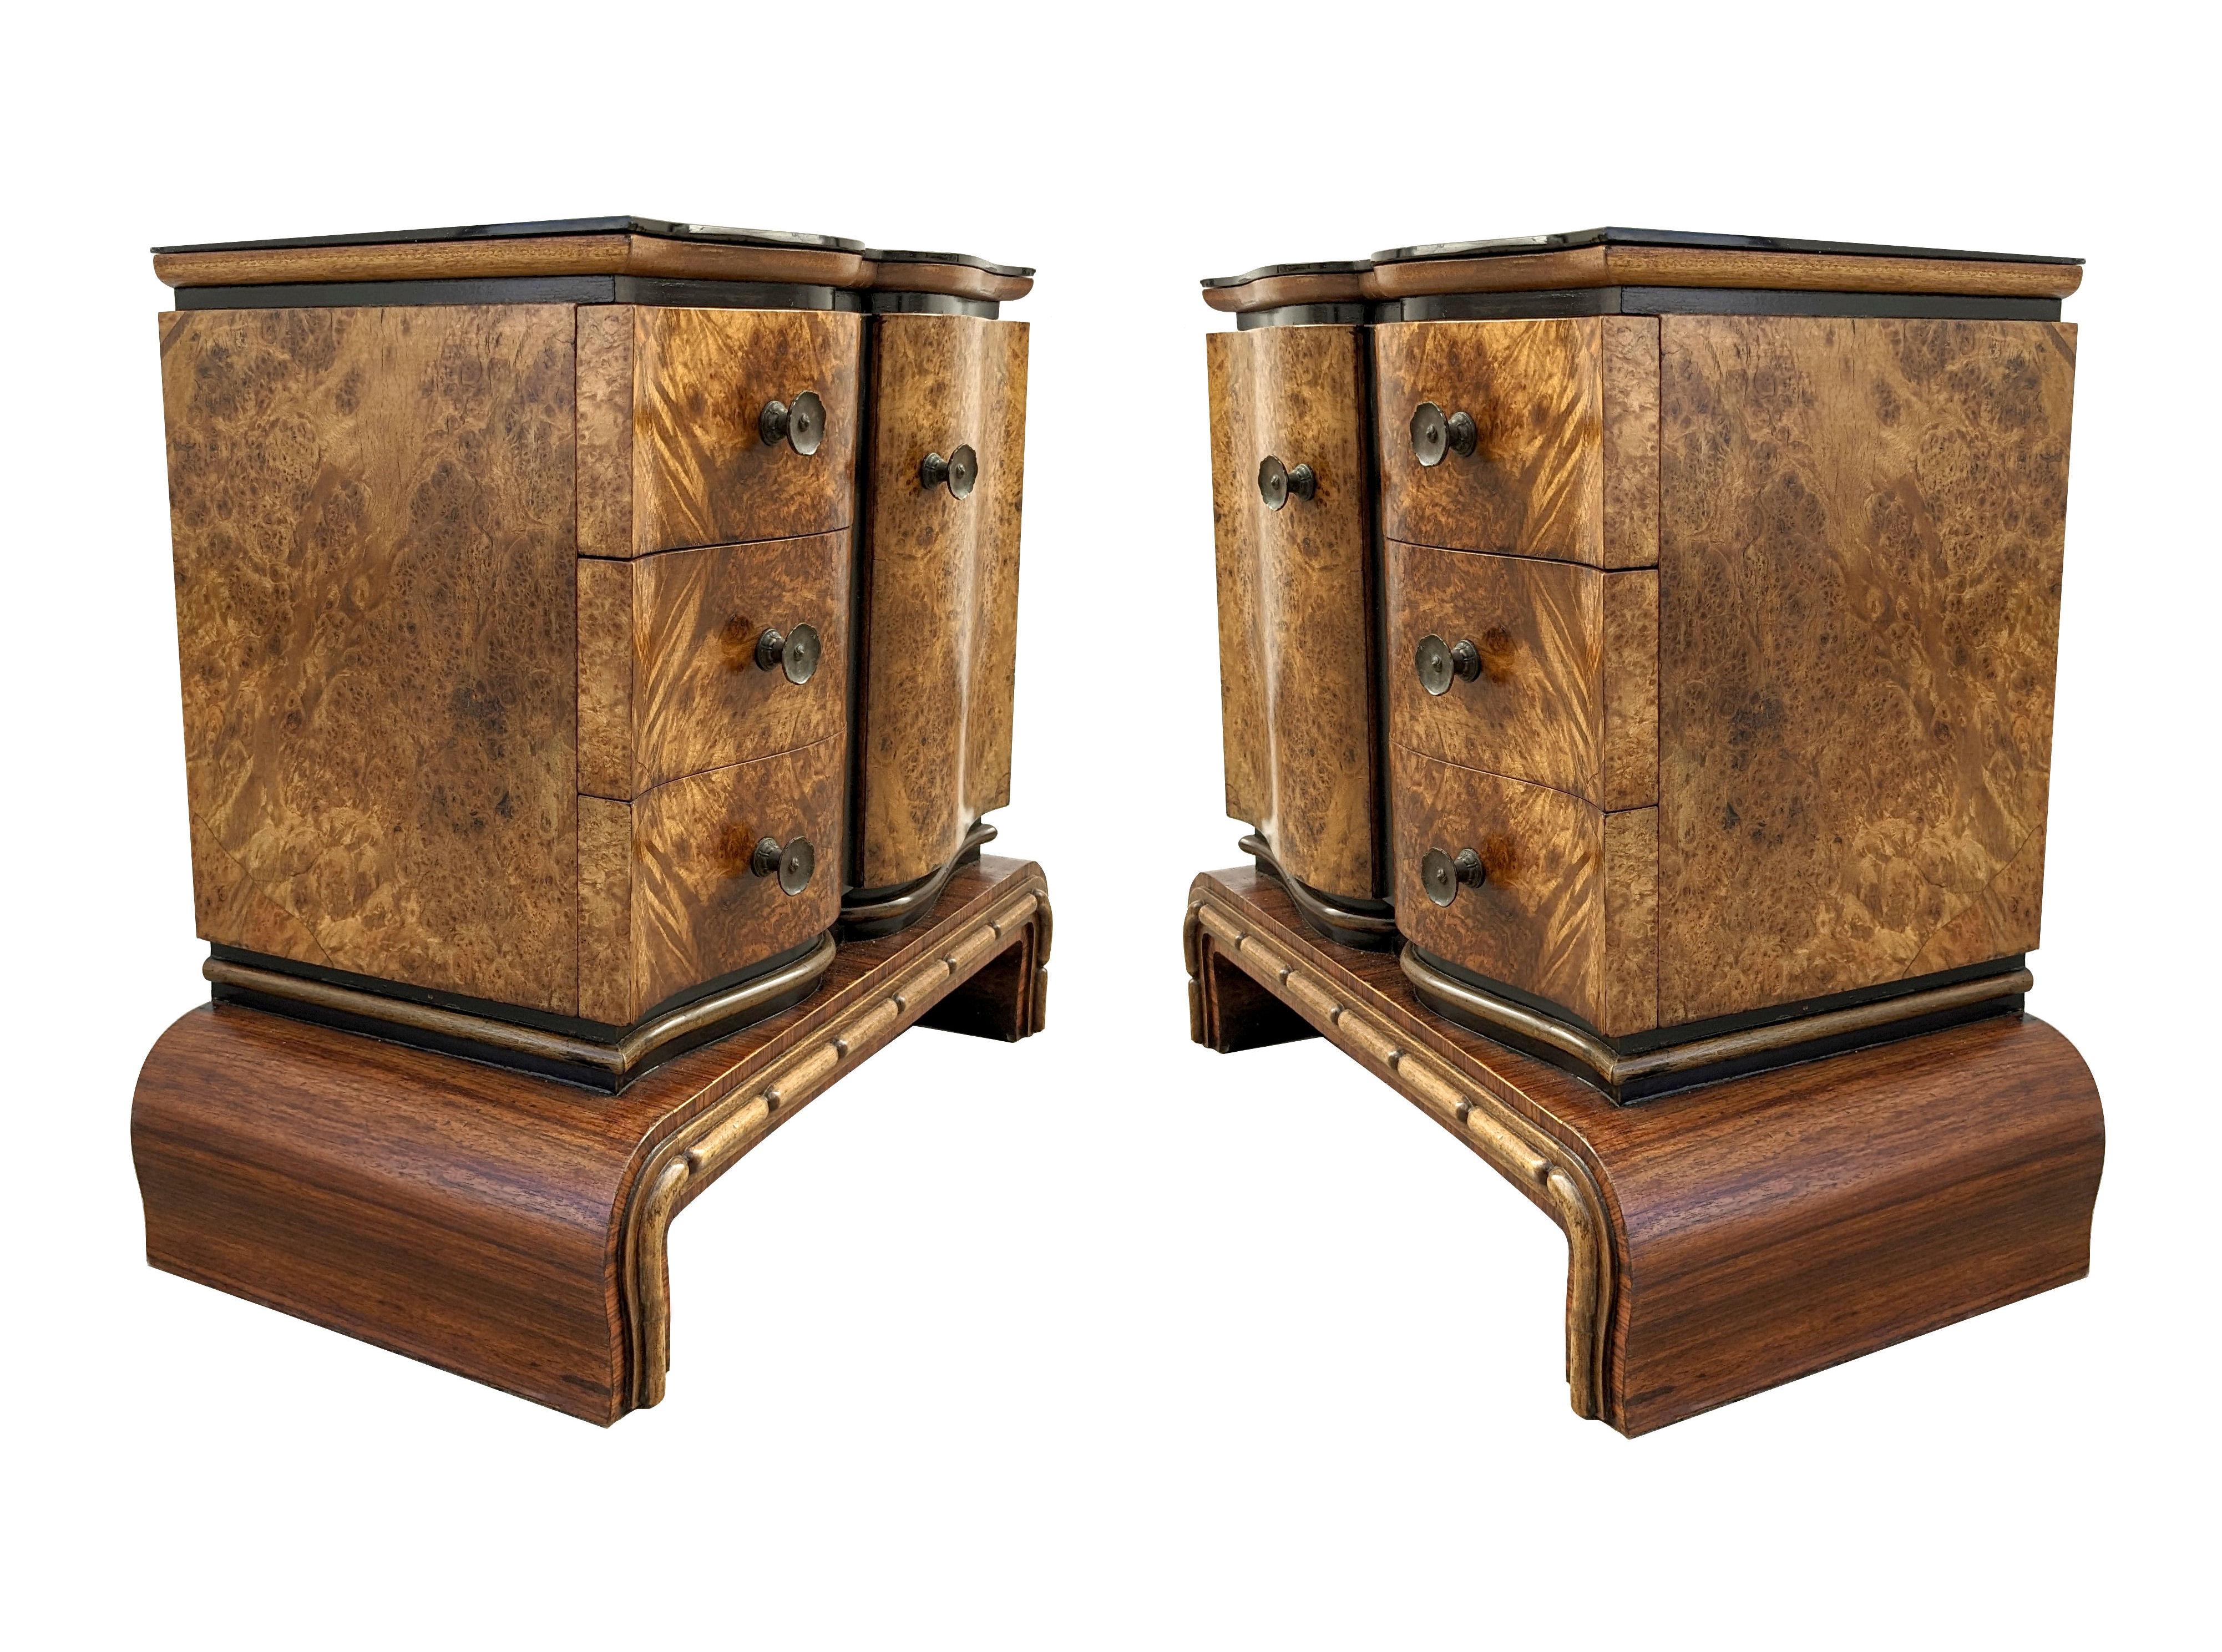 A rare opportunity to acquire such high styled and totally original Art Deco bedside tables. Originating from Italy and dating to the early 1930's they fill both the highly desired shape of Art Deco at its best and sort after the luscious veneers